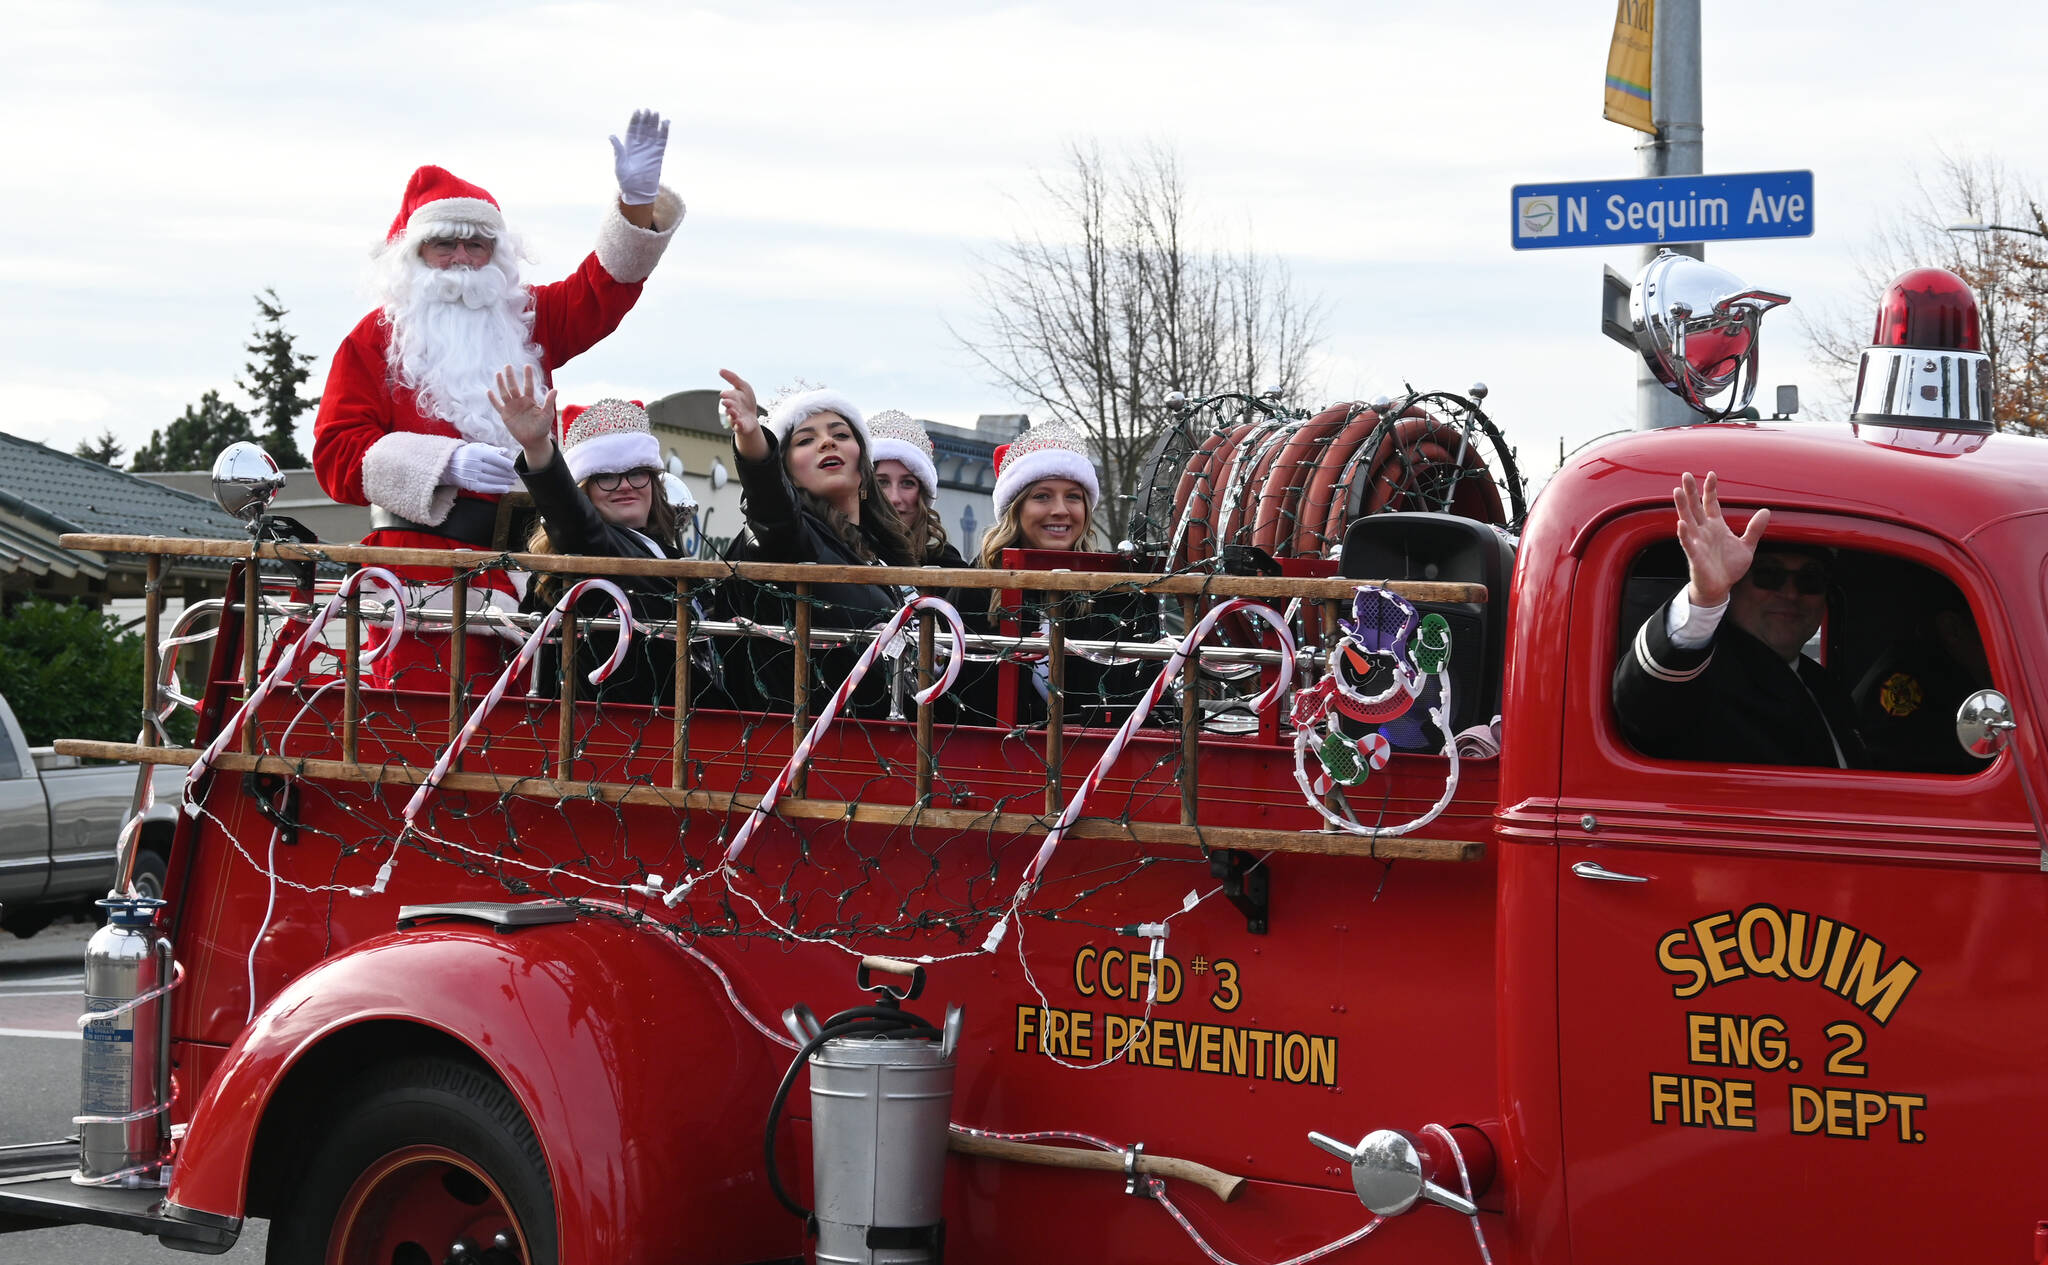 Sequim Gazette photo by Michael Dashiell / Santa Claus rides into downtown Sequim in a vintage fire engine as part of Saturday’s Hometown Holidays event, accompanied by Sequim Irrigation Festival royalty: from left, princess Lauren Willis, queen Isabella Williams, and princesses Katherine Gould and Ellie Turner.